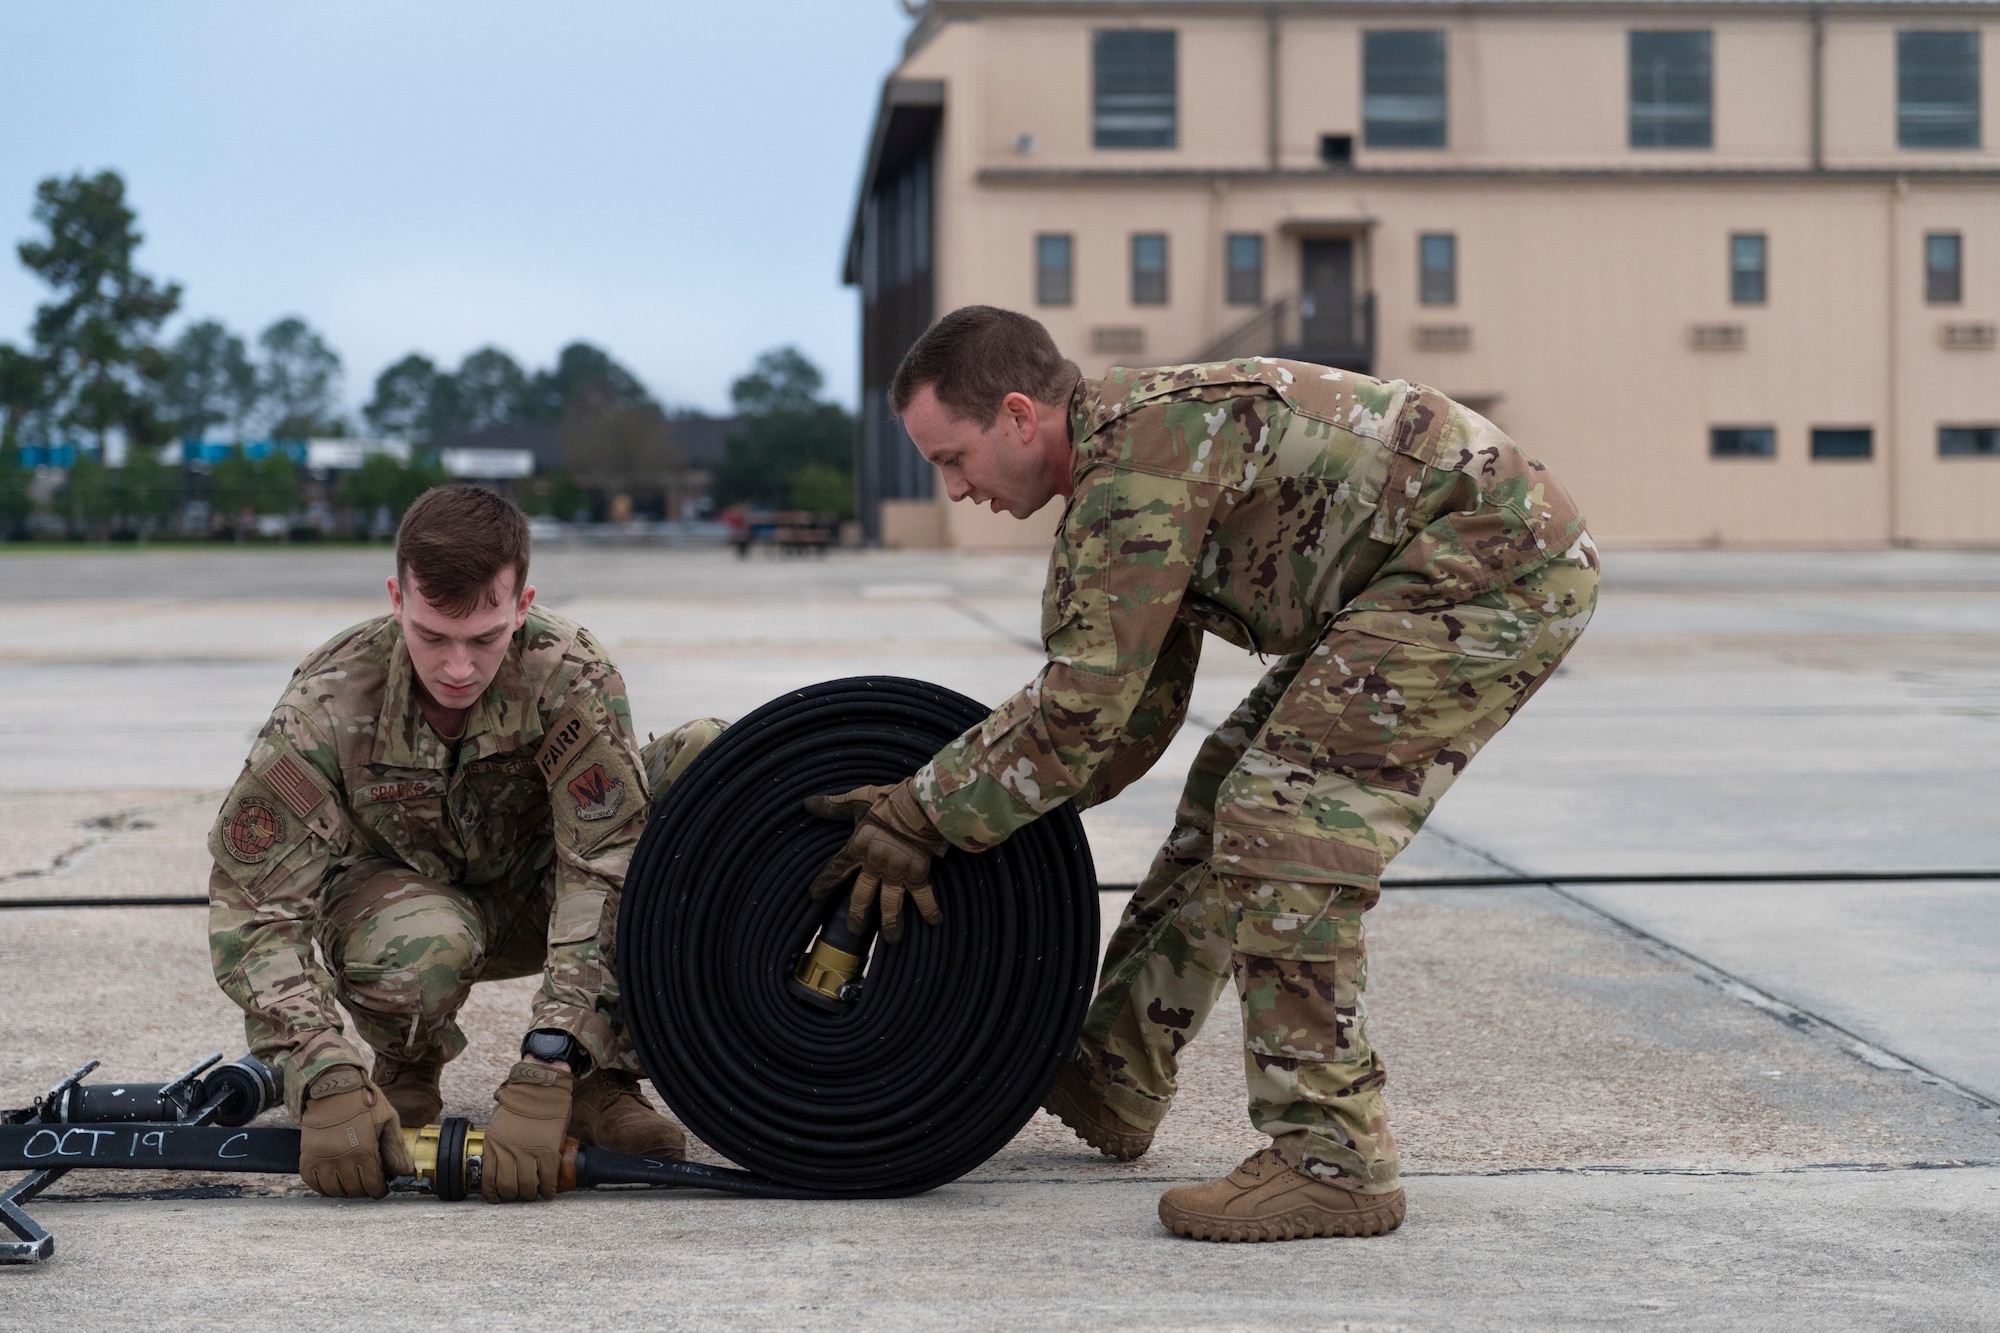 A photo of two airmen rolling up a fuel hose.